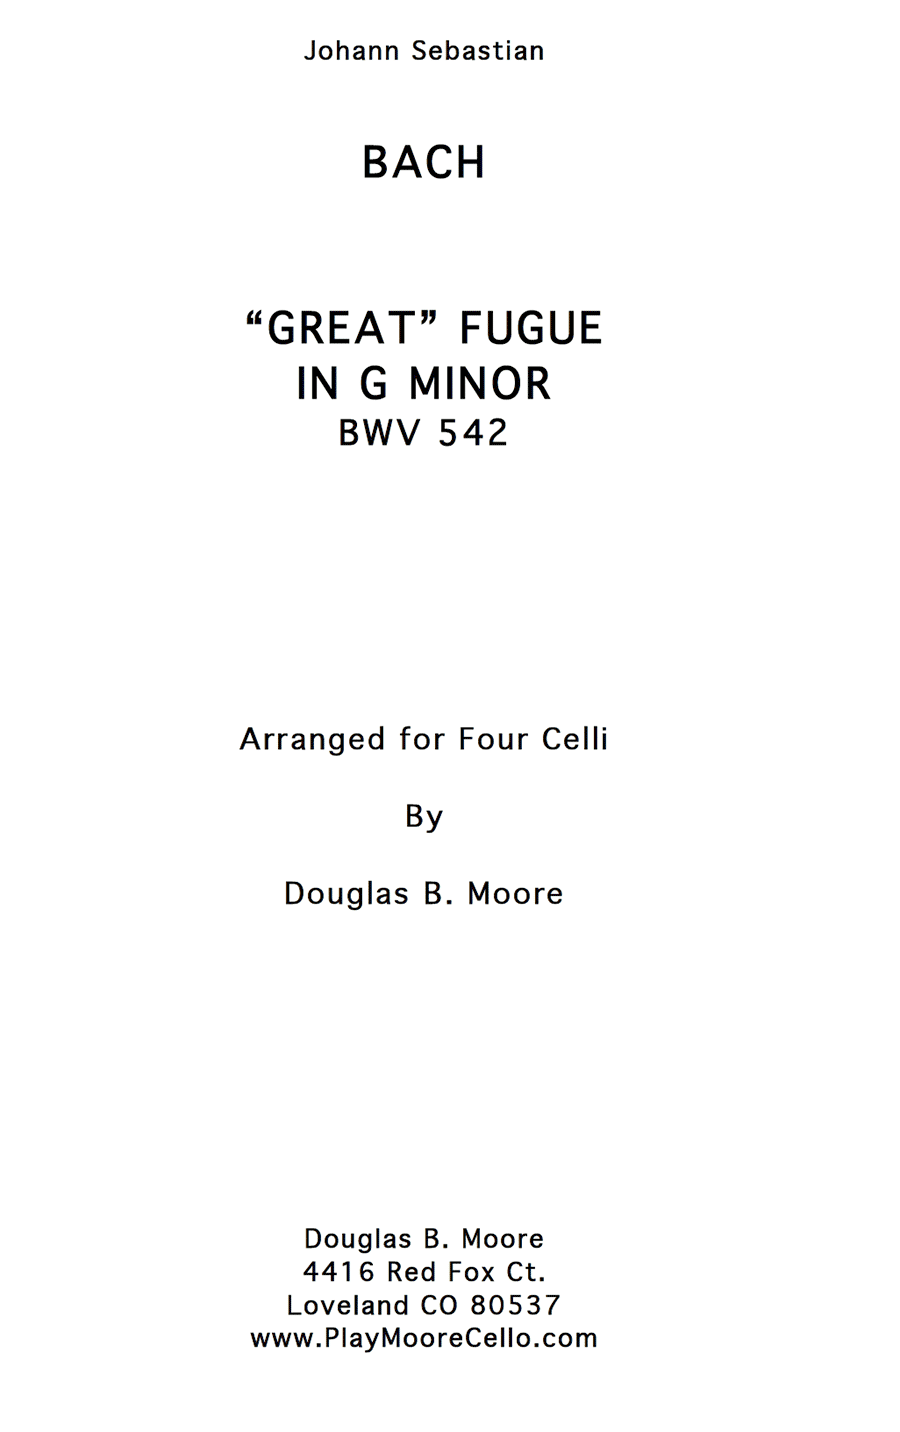 Bach: Fugue in G Minor, BWV 542 "Great"